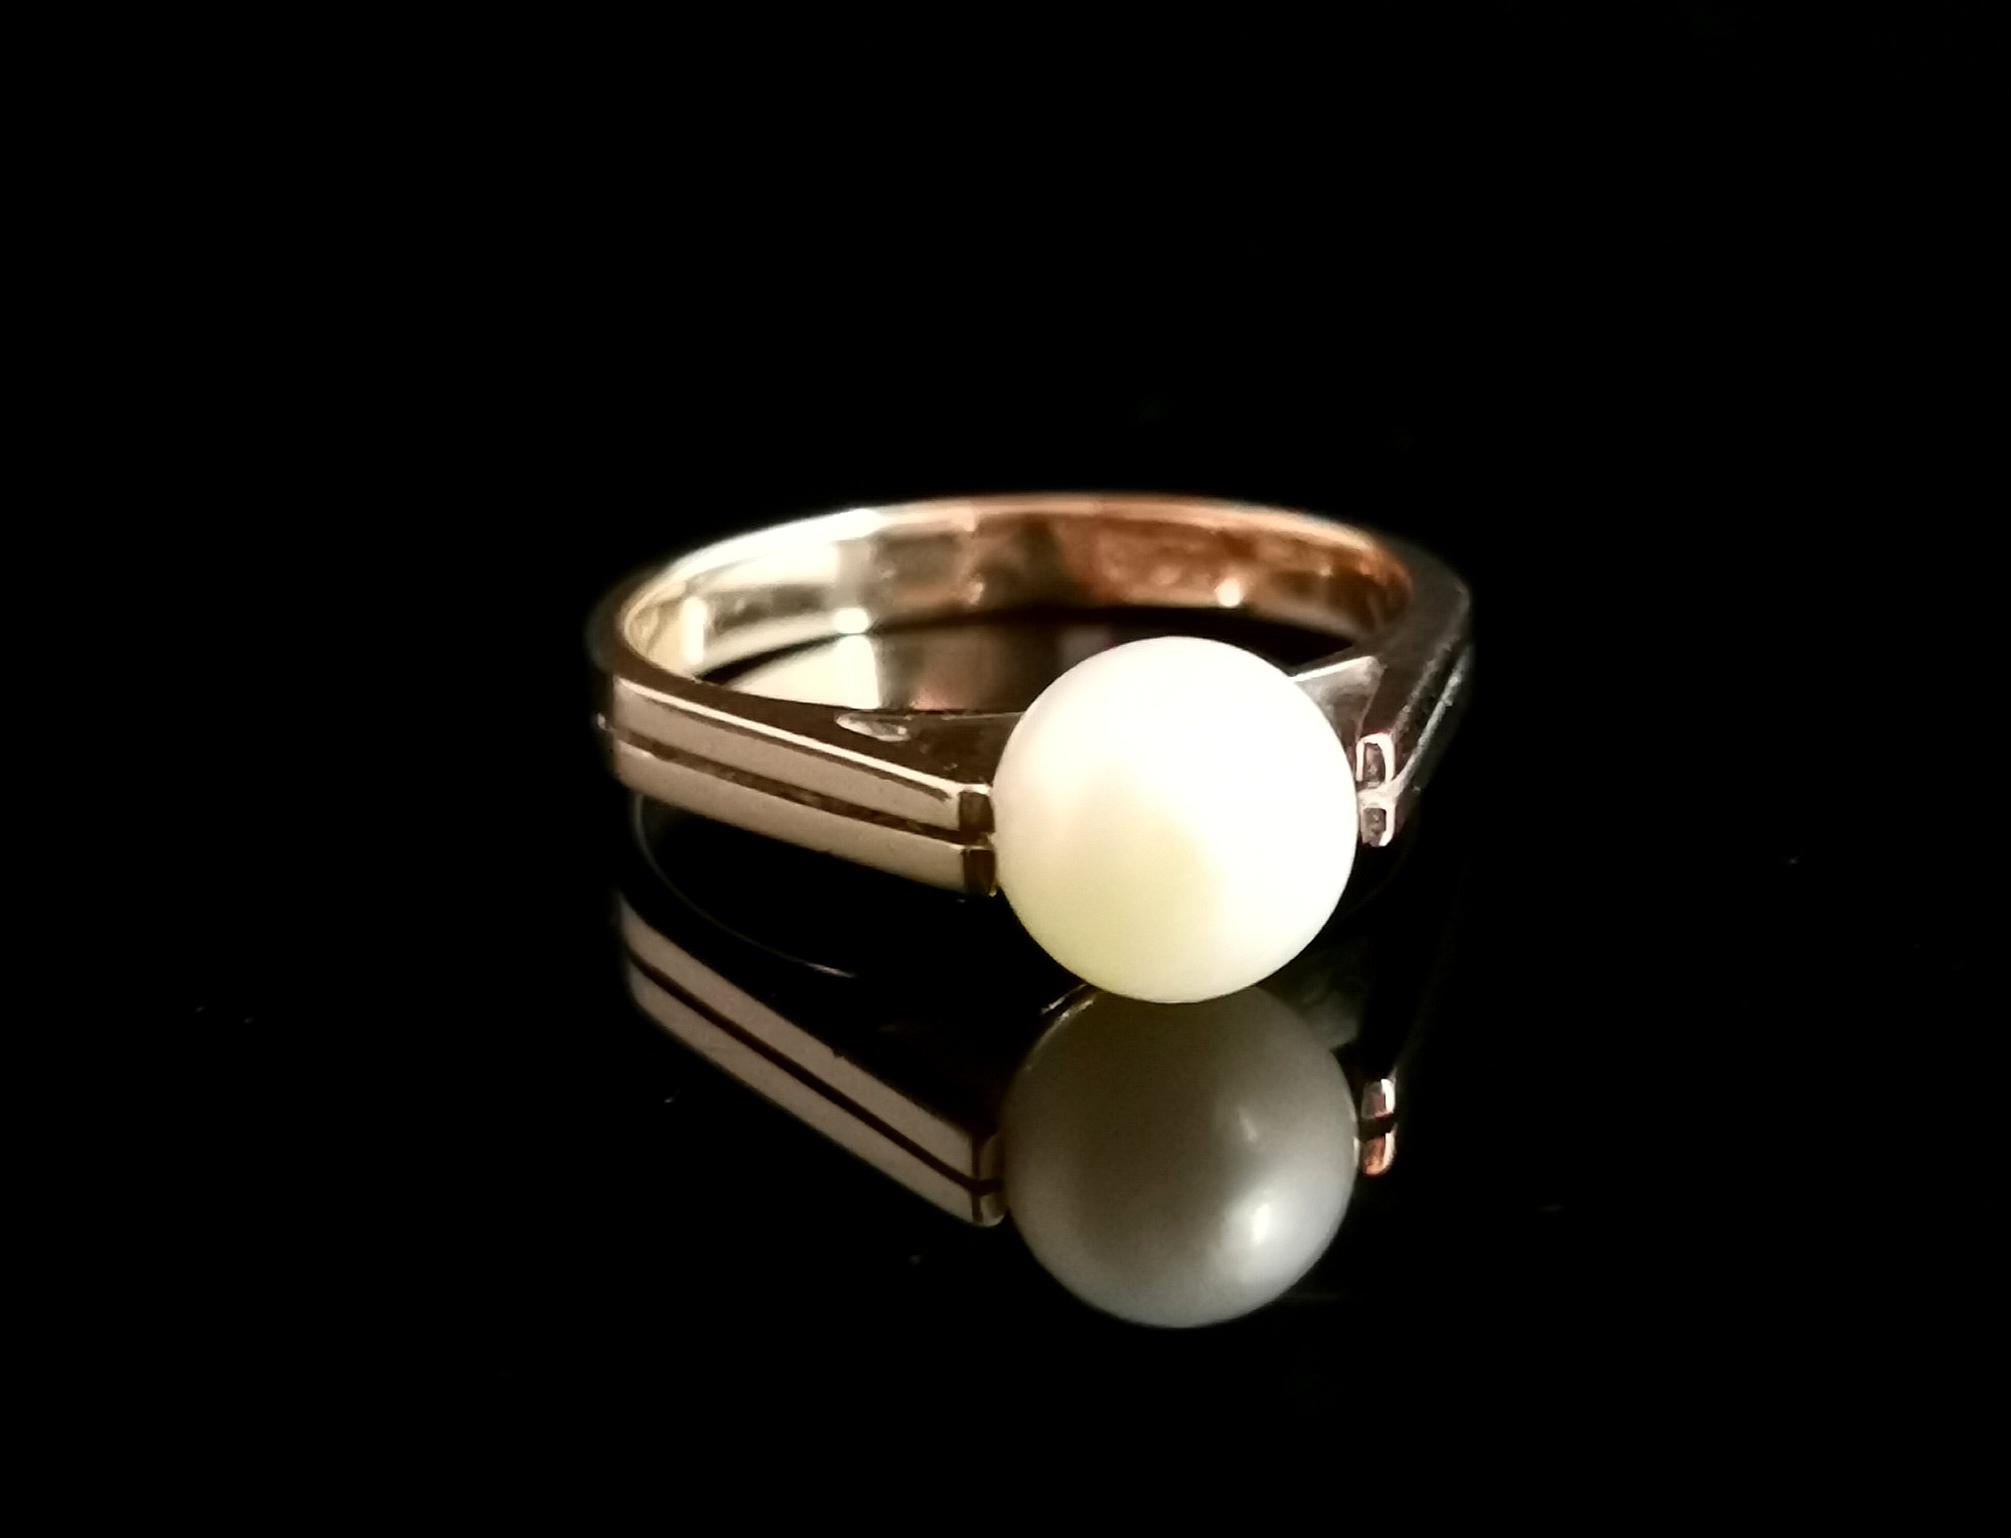 A gorgeous vintage 9 karat yellow gold pearl solitaire ring.

A mid century beauty, c1940s this ring has a nice substantial 9 karat gold band with geometric upswept shoulders that hug a single creamy cultured pearl.

The angular lines of the